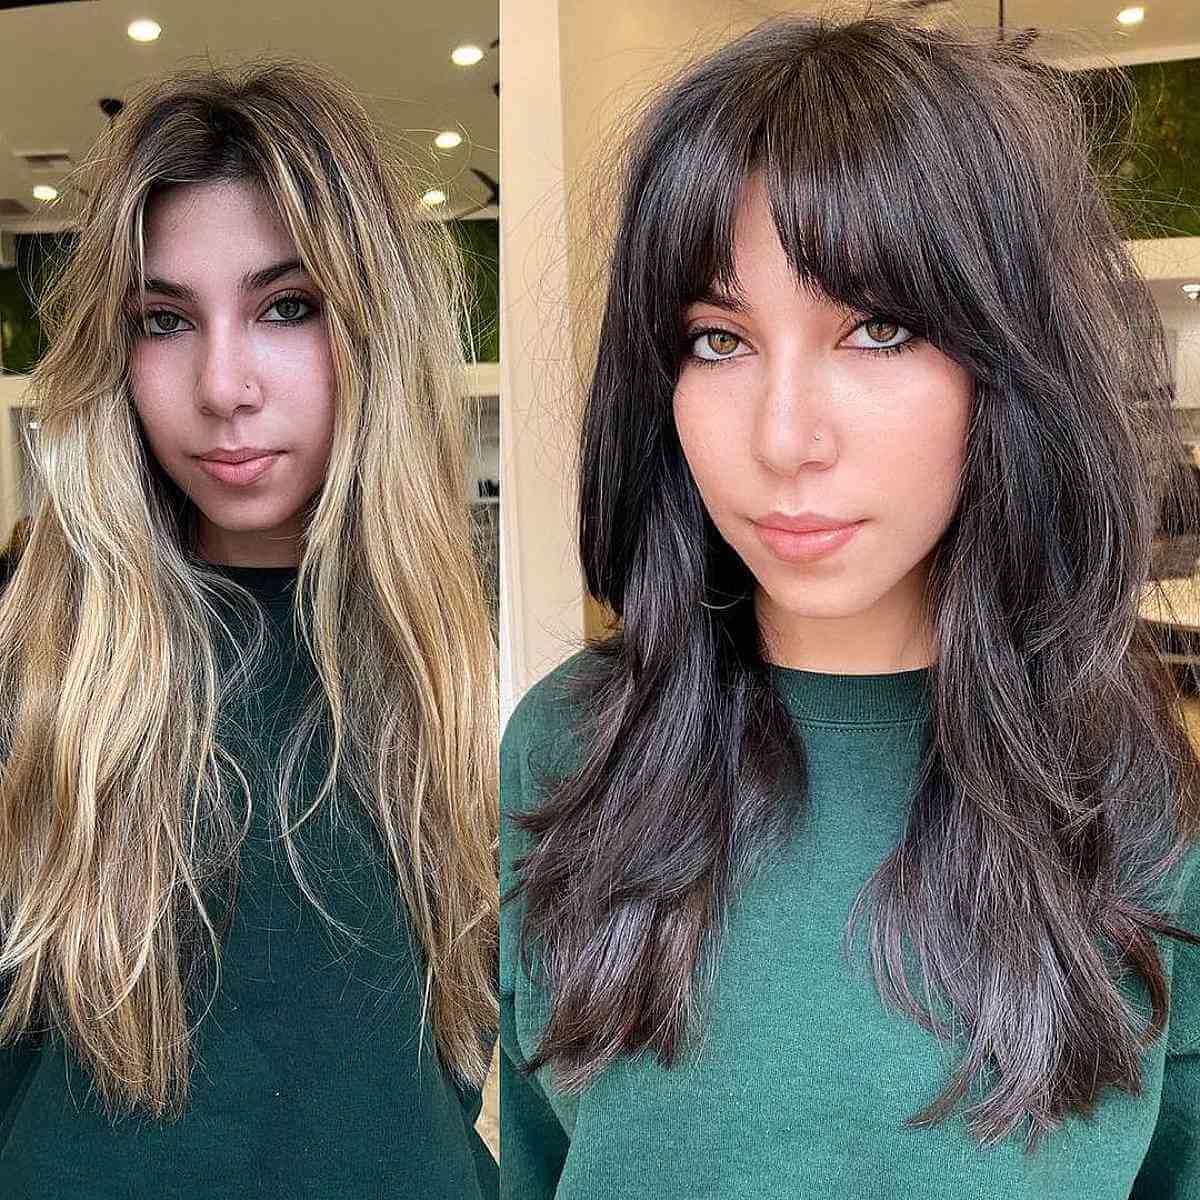 Multi-Layered Long Shaggy Cut with Middle Part Bangs